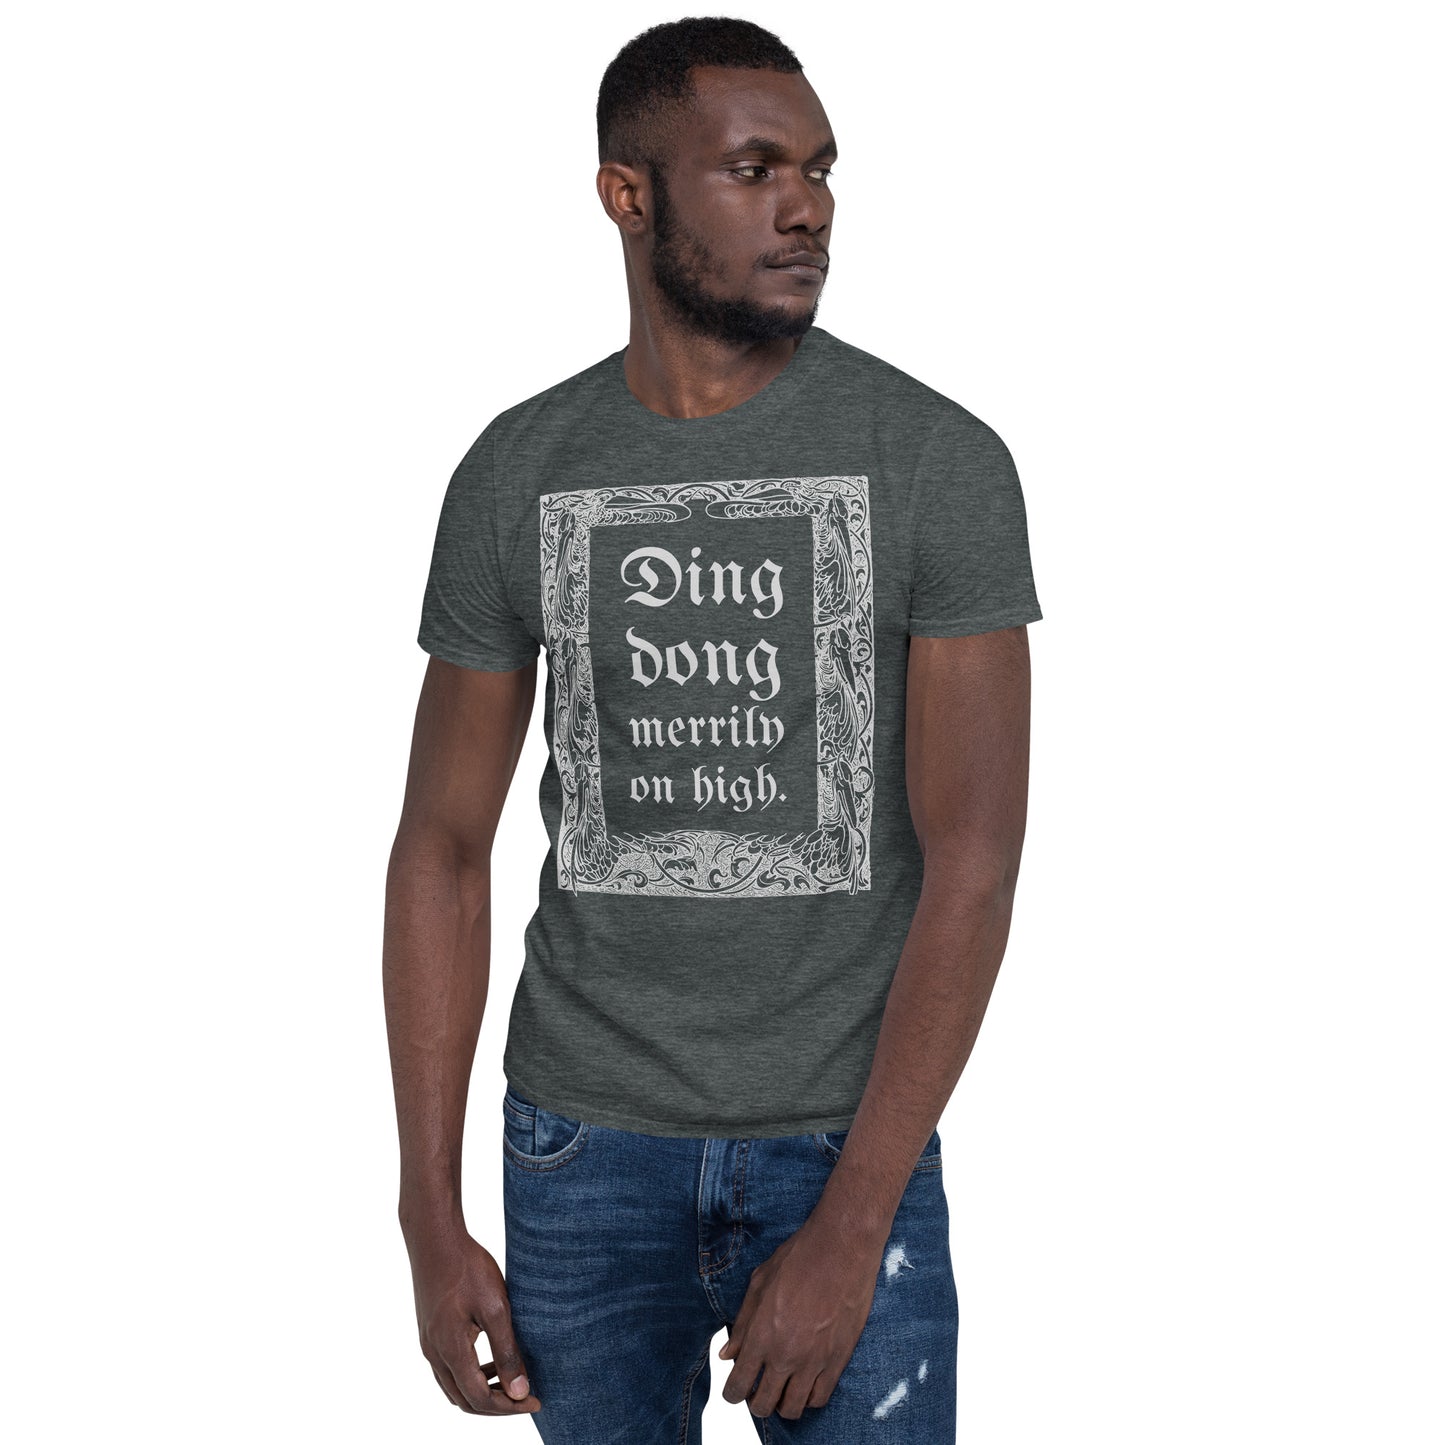 Ding Dong Merrily on High Short-Sleeve Unisex T-Shirt, Ding Dong t-Shirt, Christmas Carol, Old Film Quote